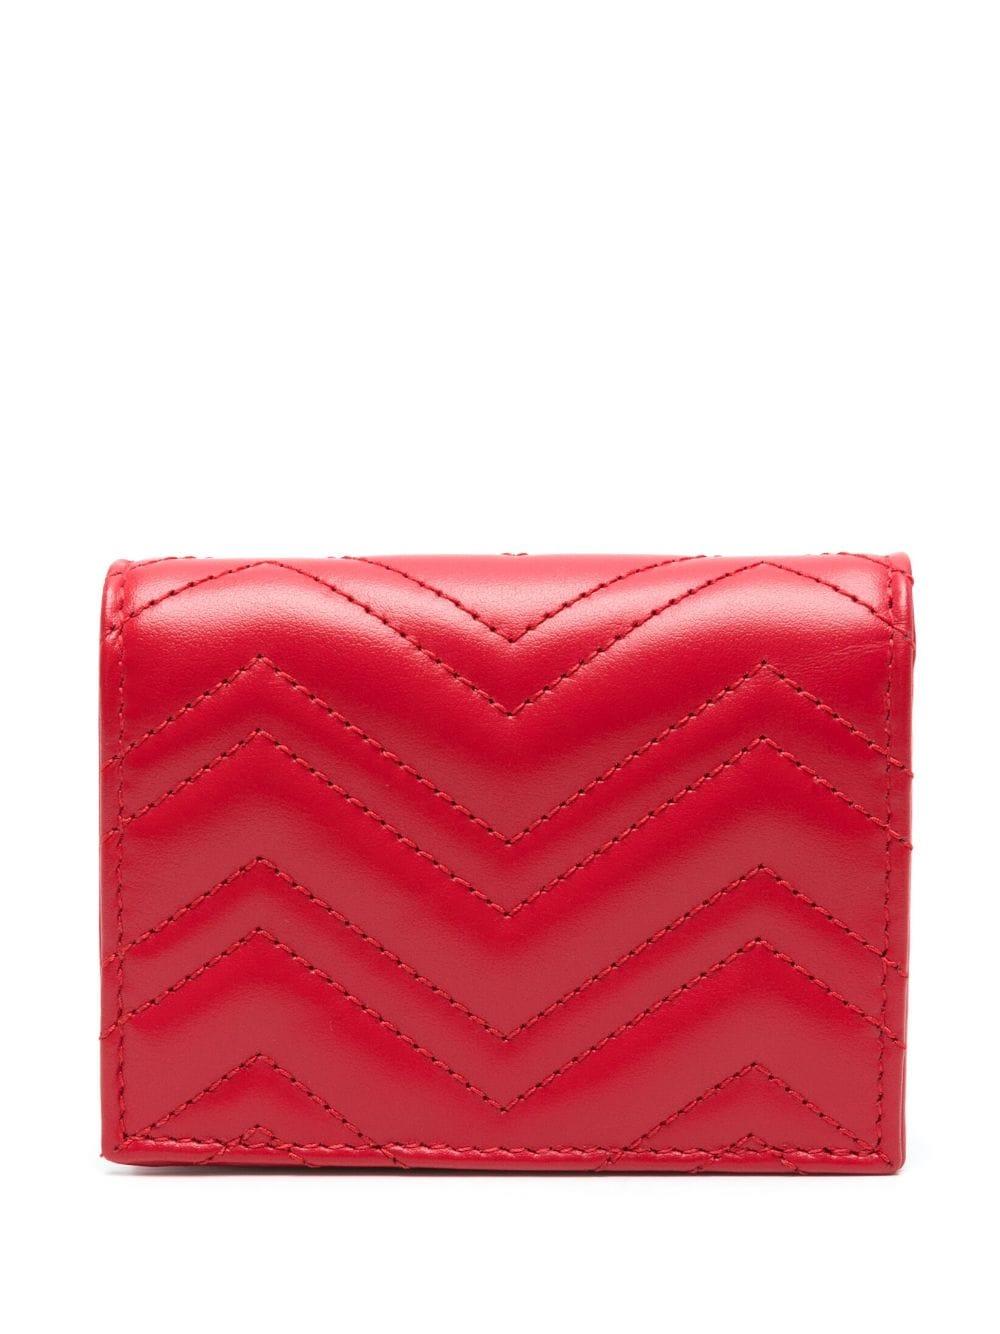 Gucci GG Marmont leather wallet - Red